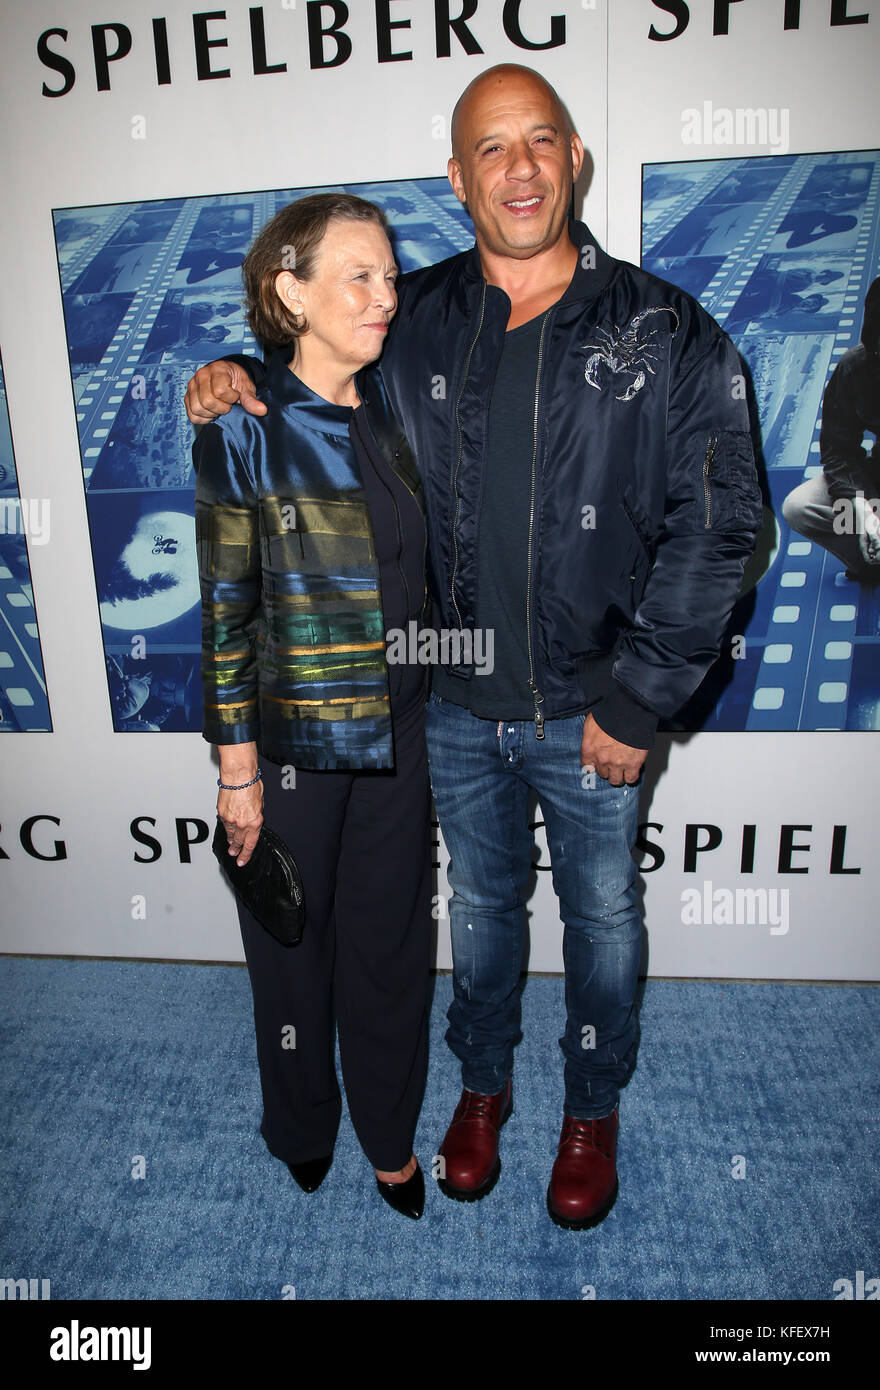 HBO's Documentary Premiere of 'Spielberg' - Arrivals  Featuring: Delora Vincent, Vin Diesel Where: Hollywood, California, United States When: 27 Sep 2017 Credit: FayesVision/WENN.com Stock Photo